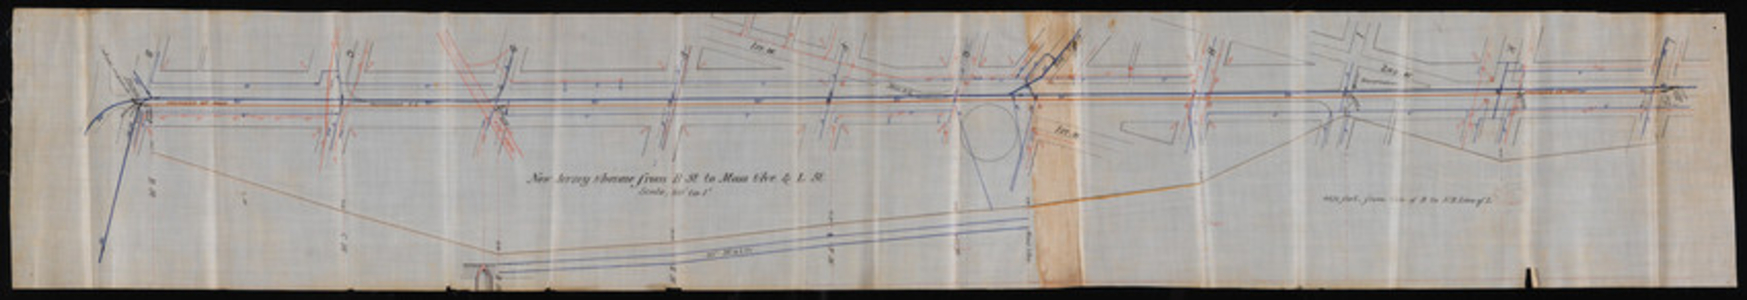 Plan, New Jersey Avenue Mains from B Street to L Street, undated